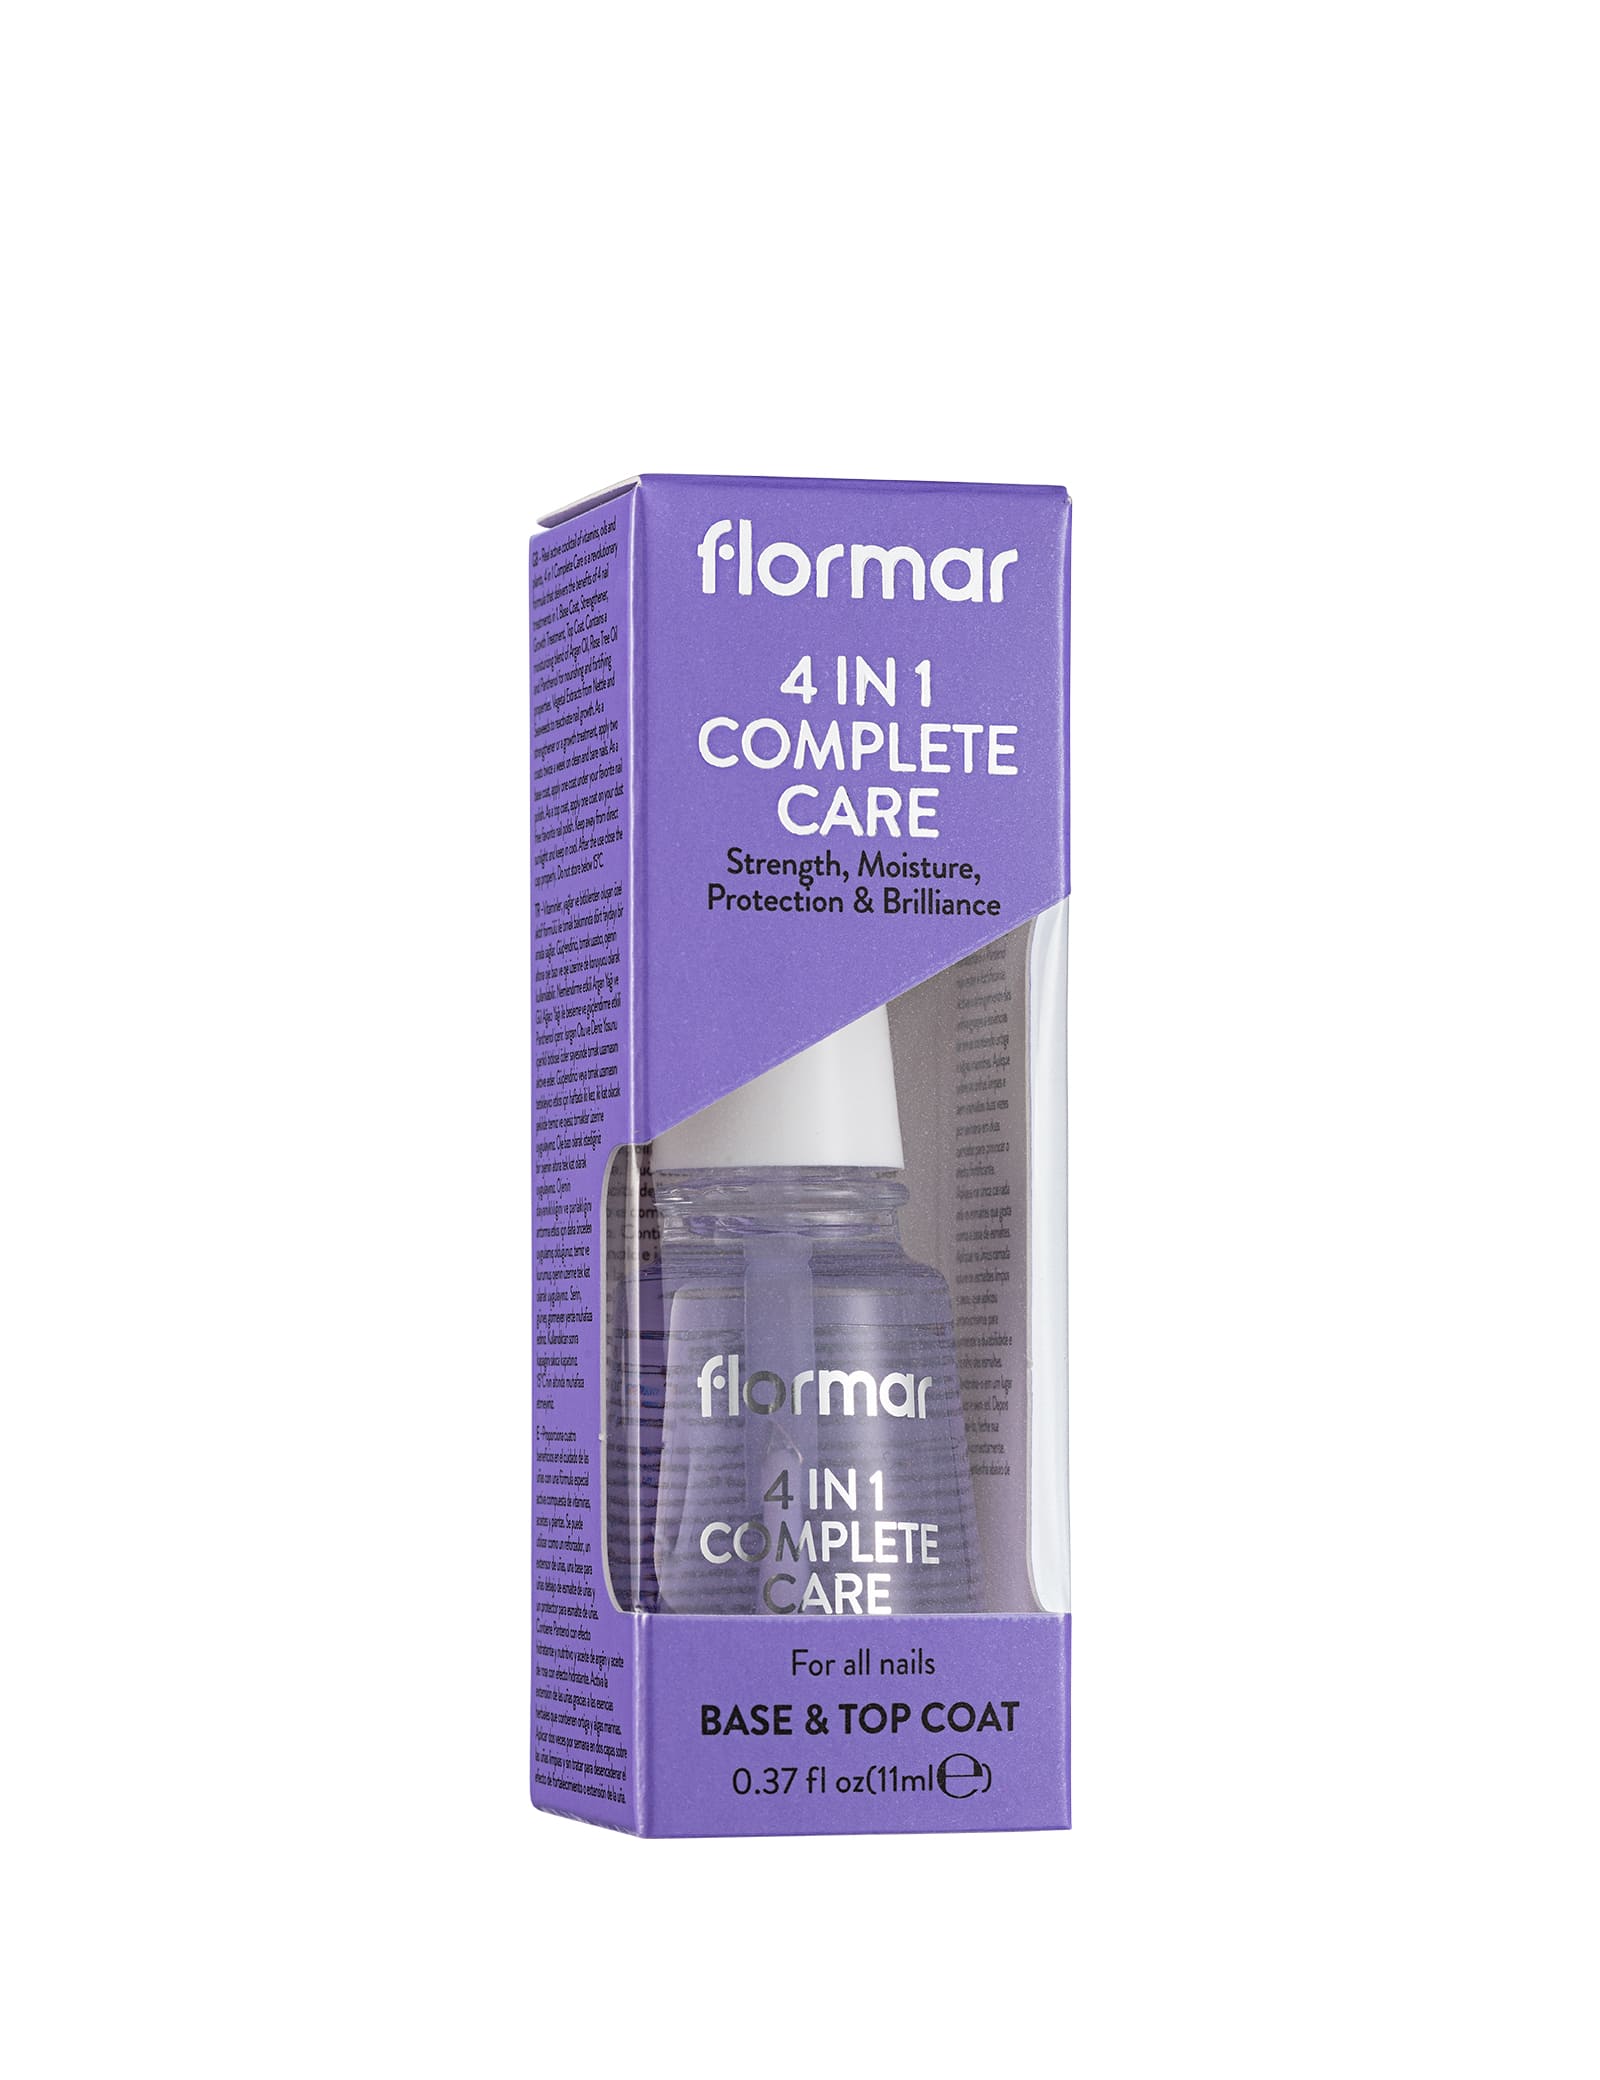 Flormar NAIL CARE 4 IN 1 COMPLETE CARE